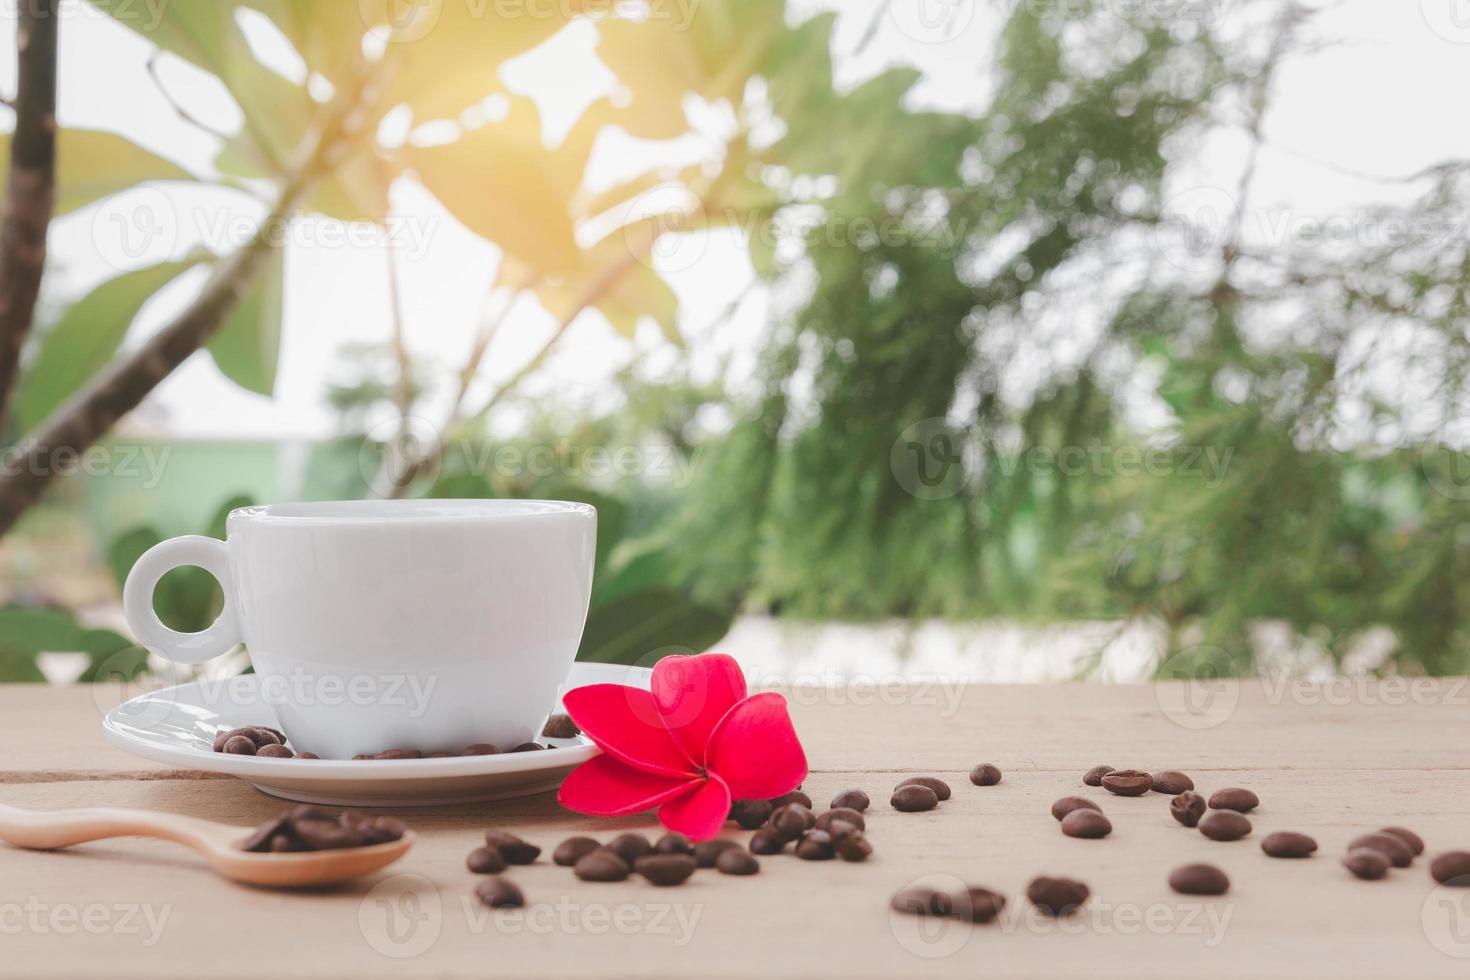 A white coffee cup with a saucer and spoon is placed on a wooden plate on the landscape nature background. photo